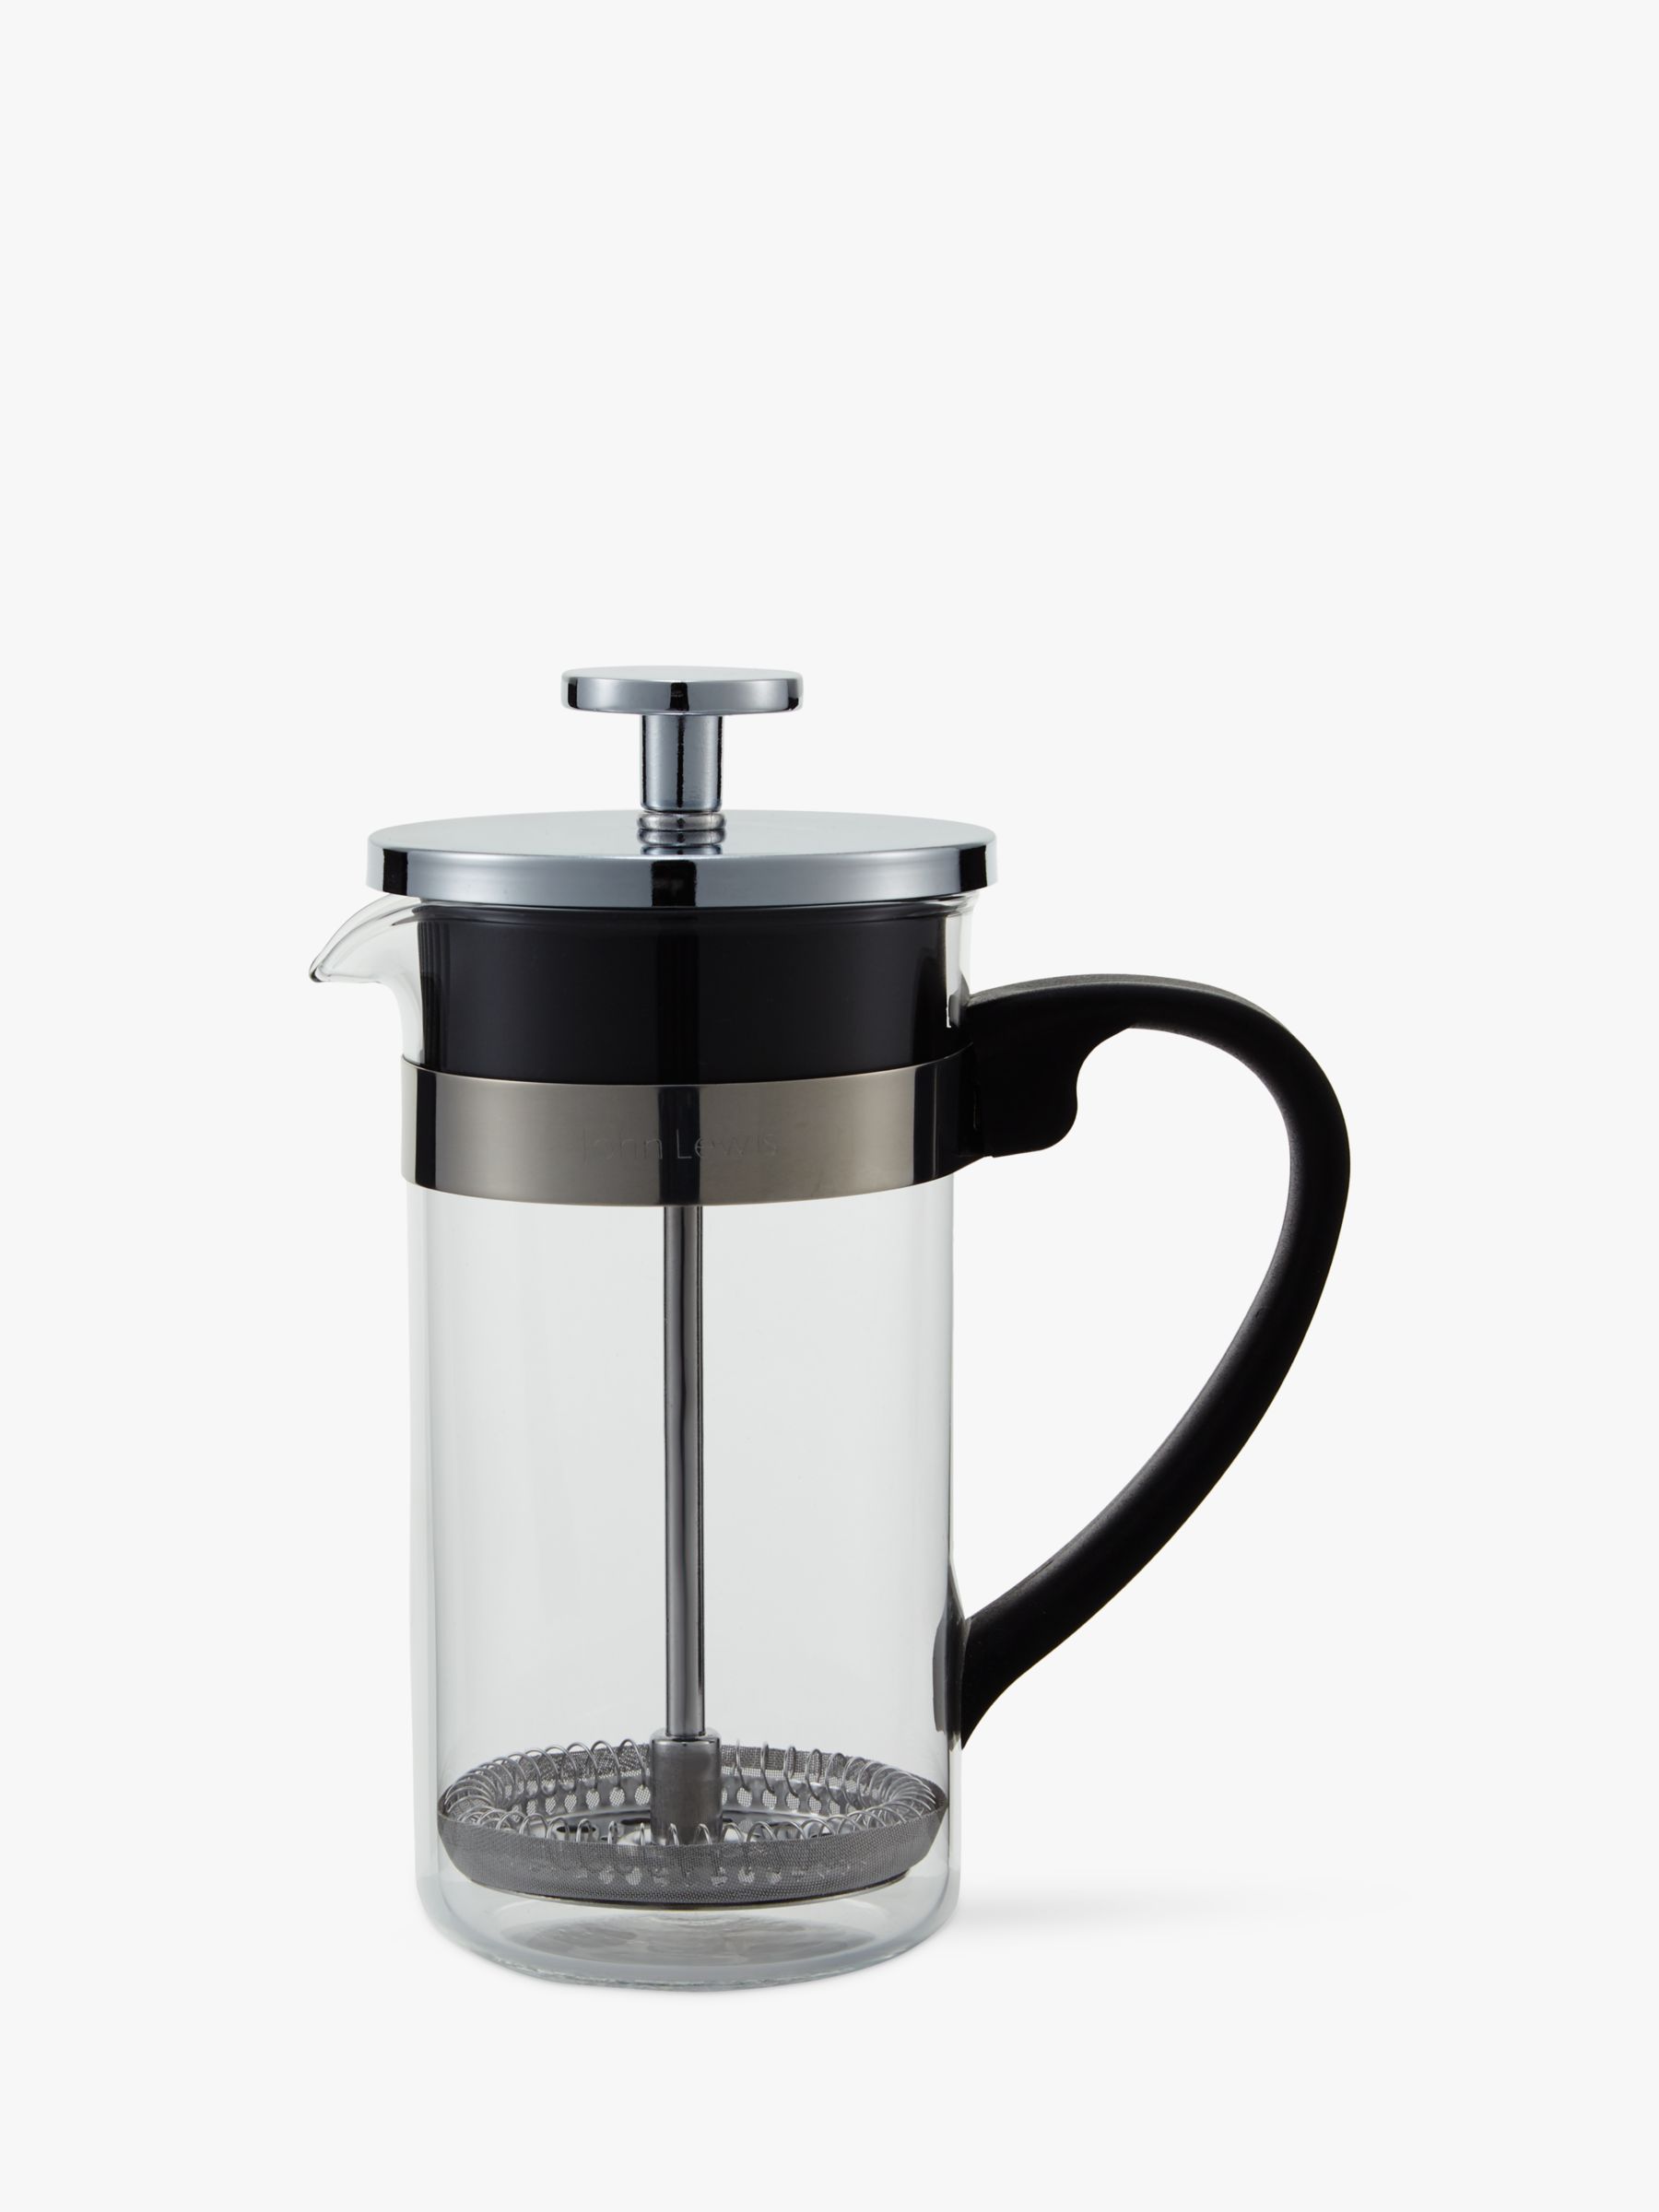 House by John Lewis Cafetiere, 3 Cup